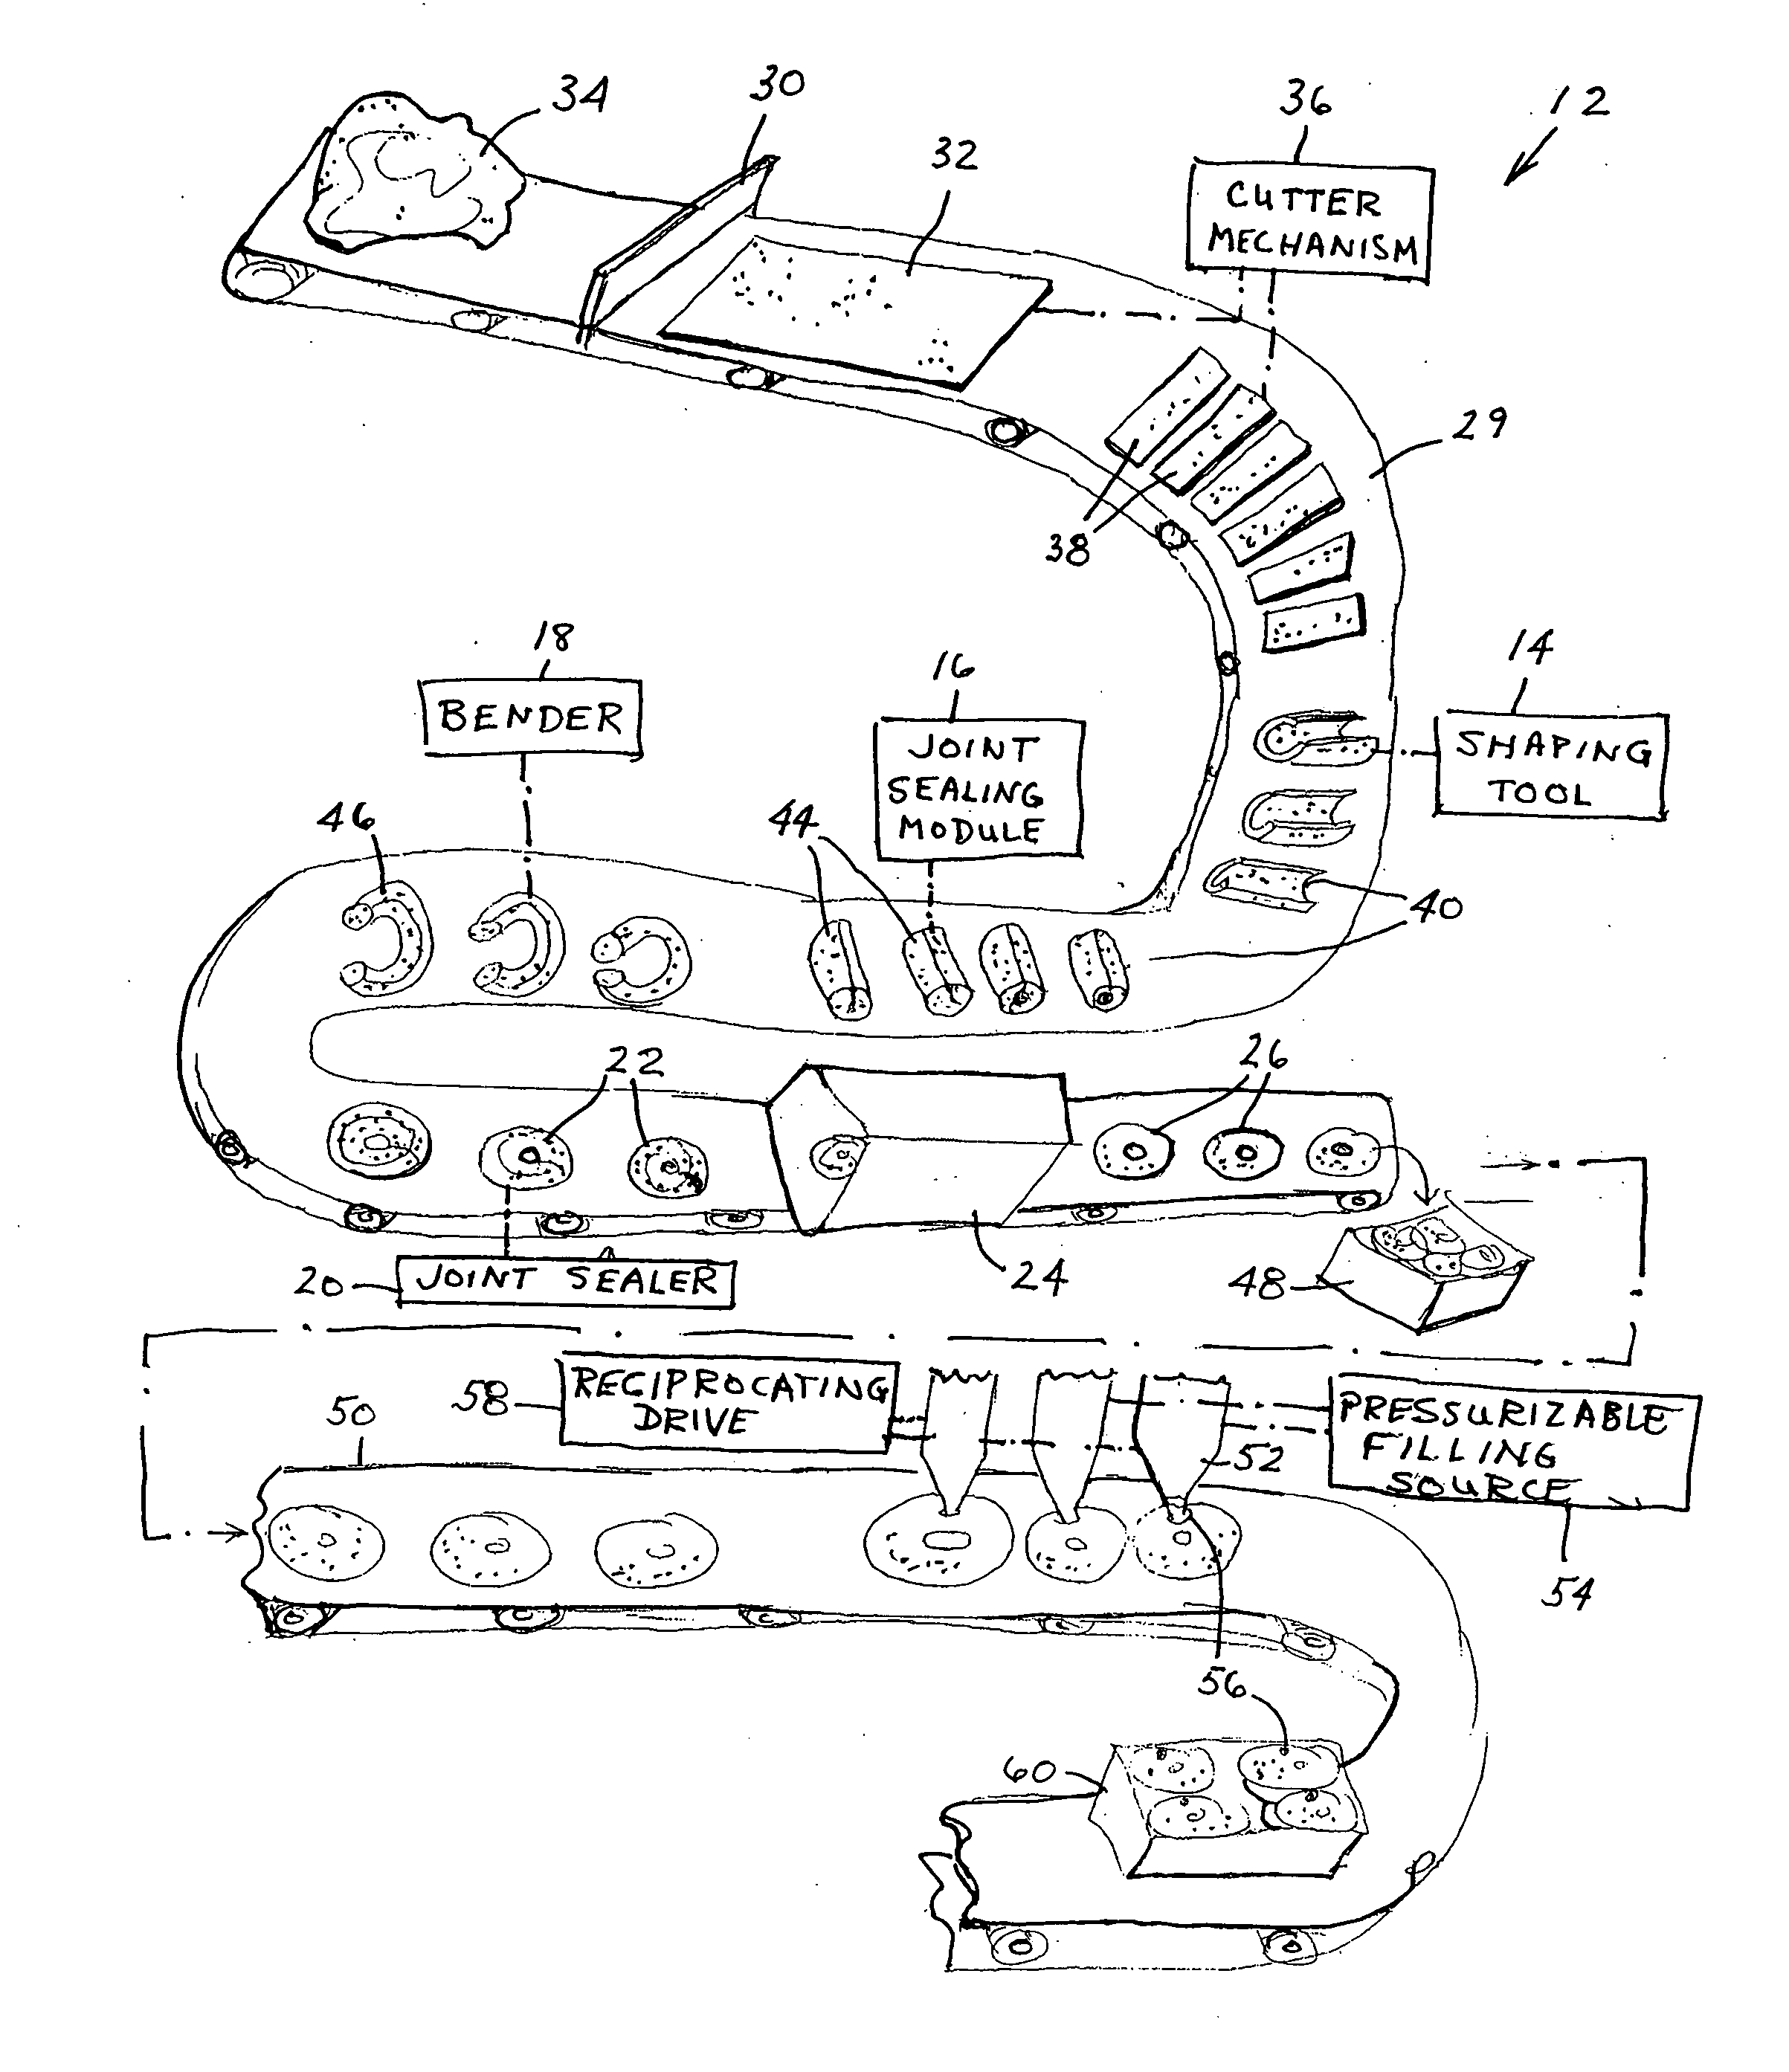 Food forming and cooking apparatus and associated method